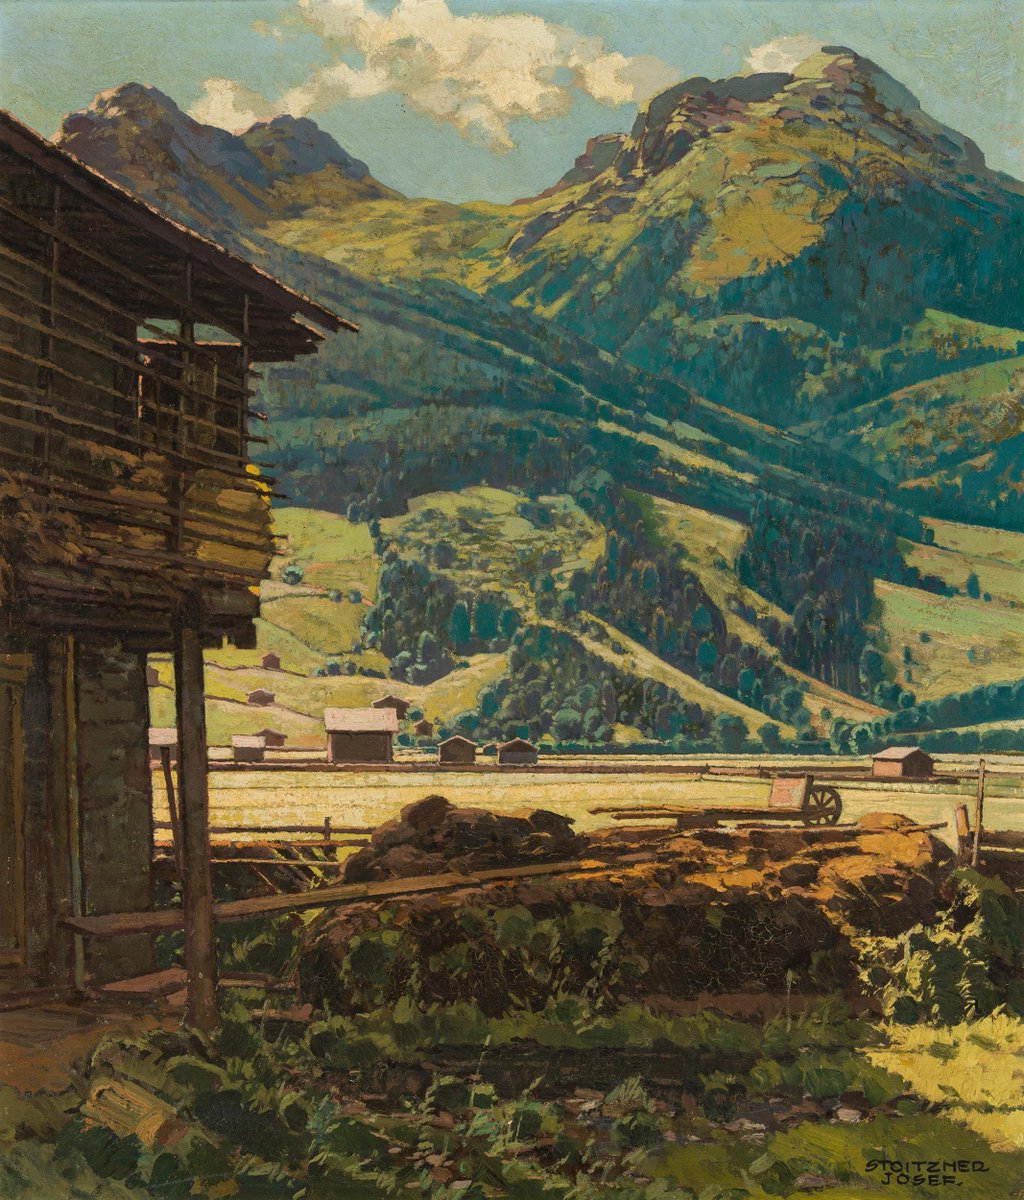 The extraordinary mountain landscapes of the Austrian painter Josef Stoitzner (1884–1951)